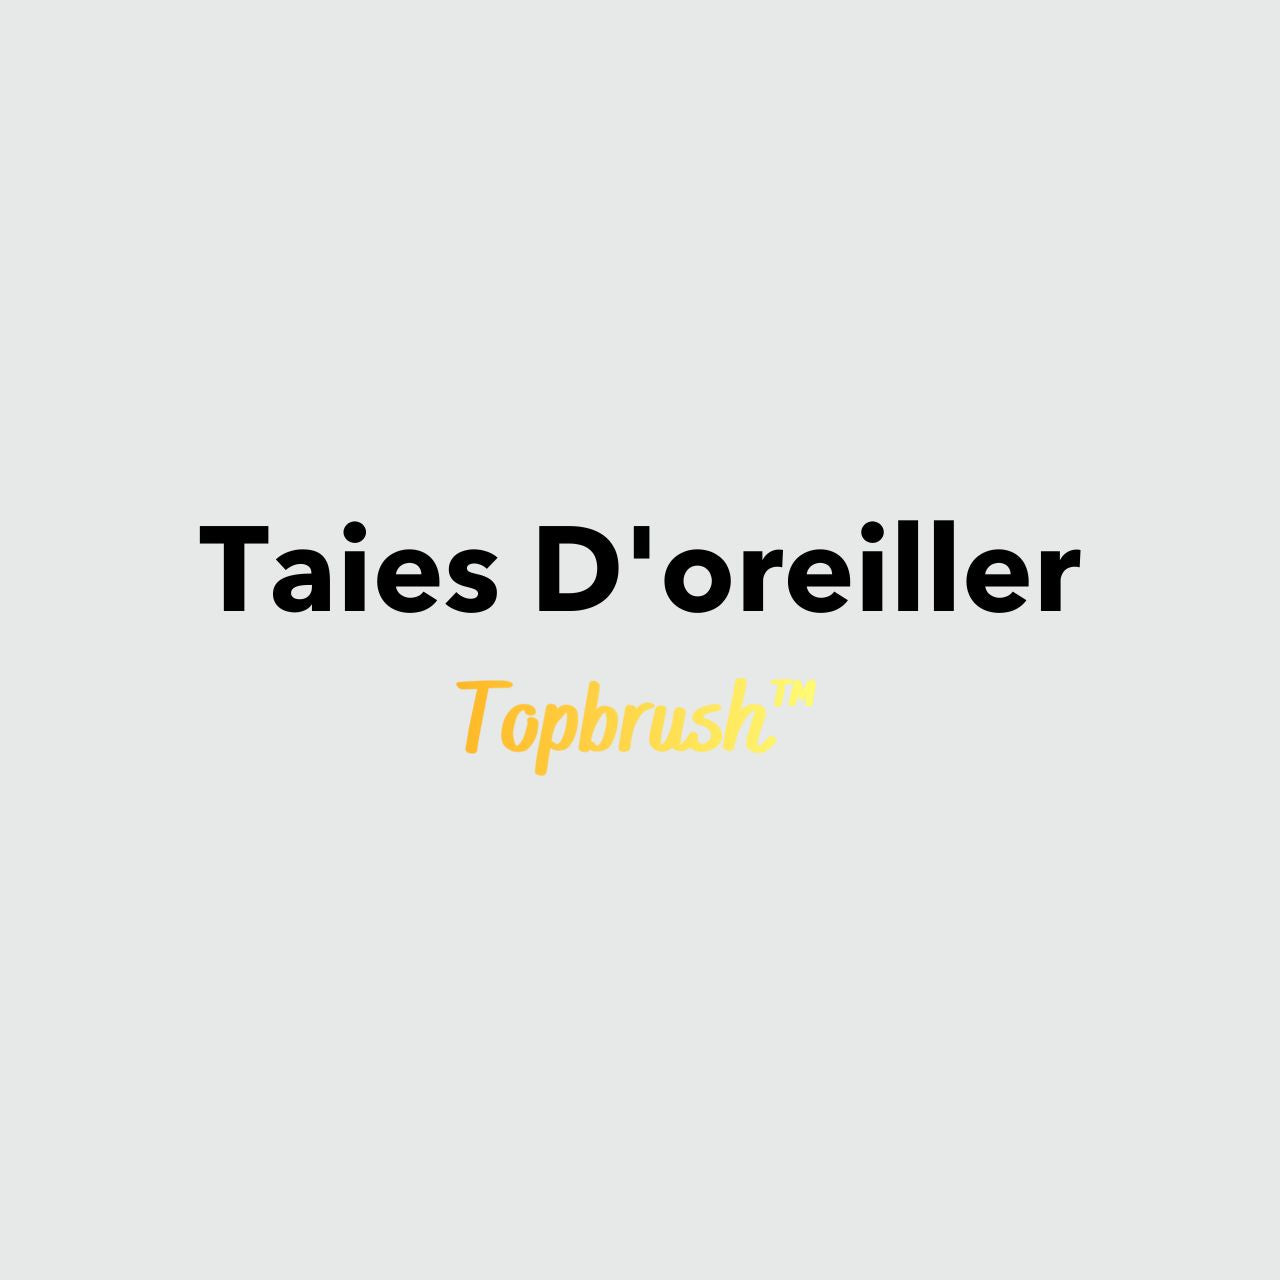 Collection Taies D'oreiller Topbrush